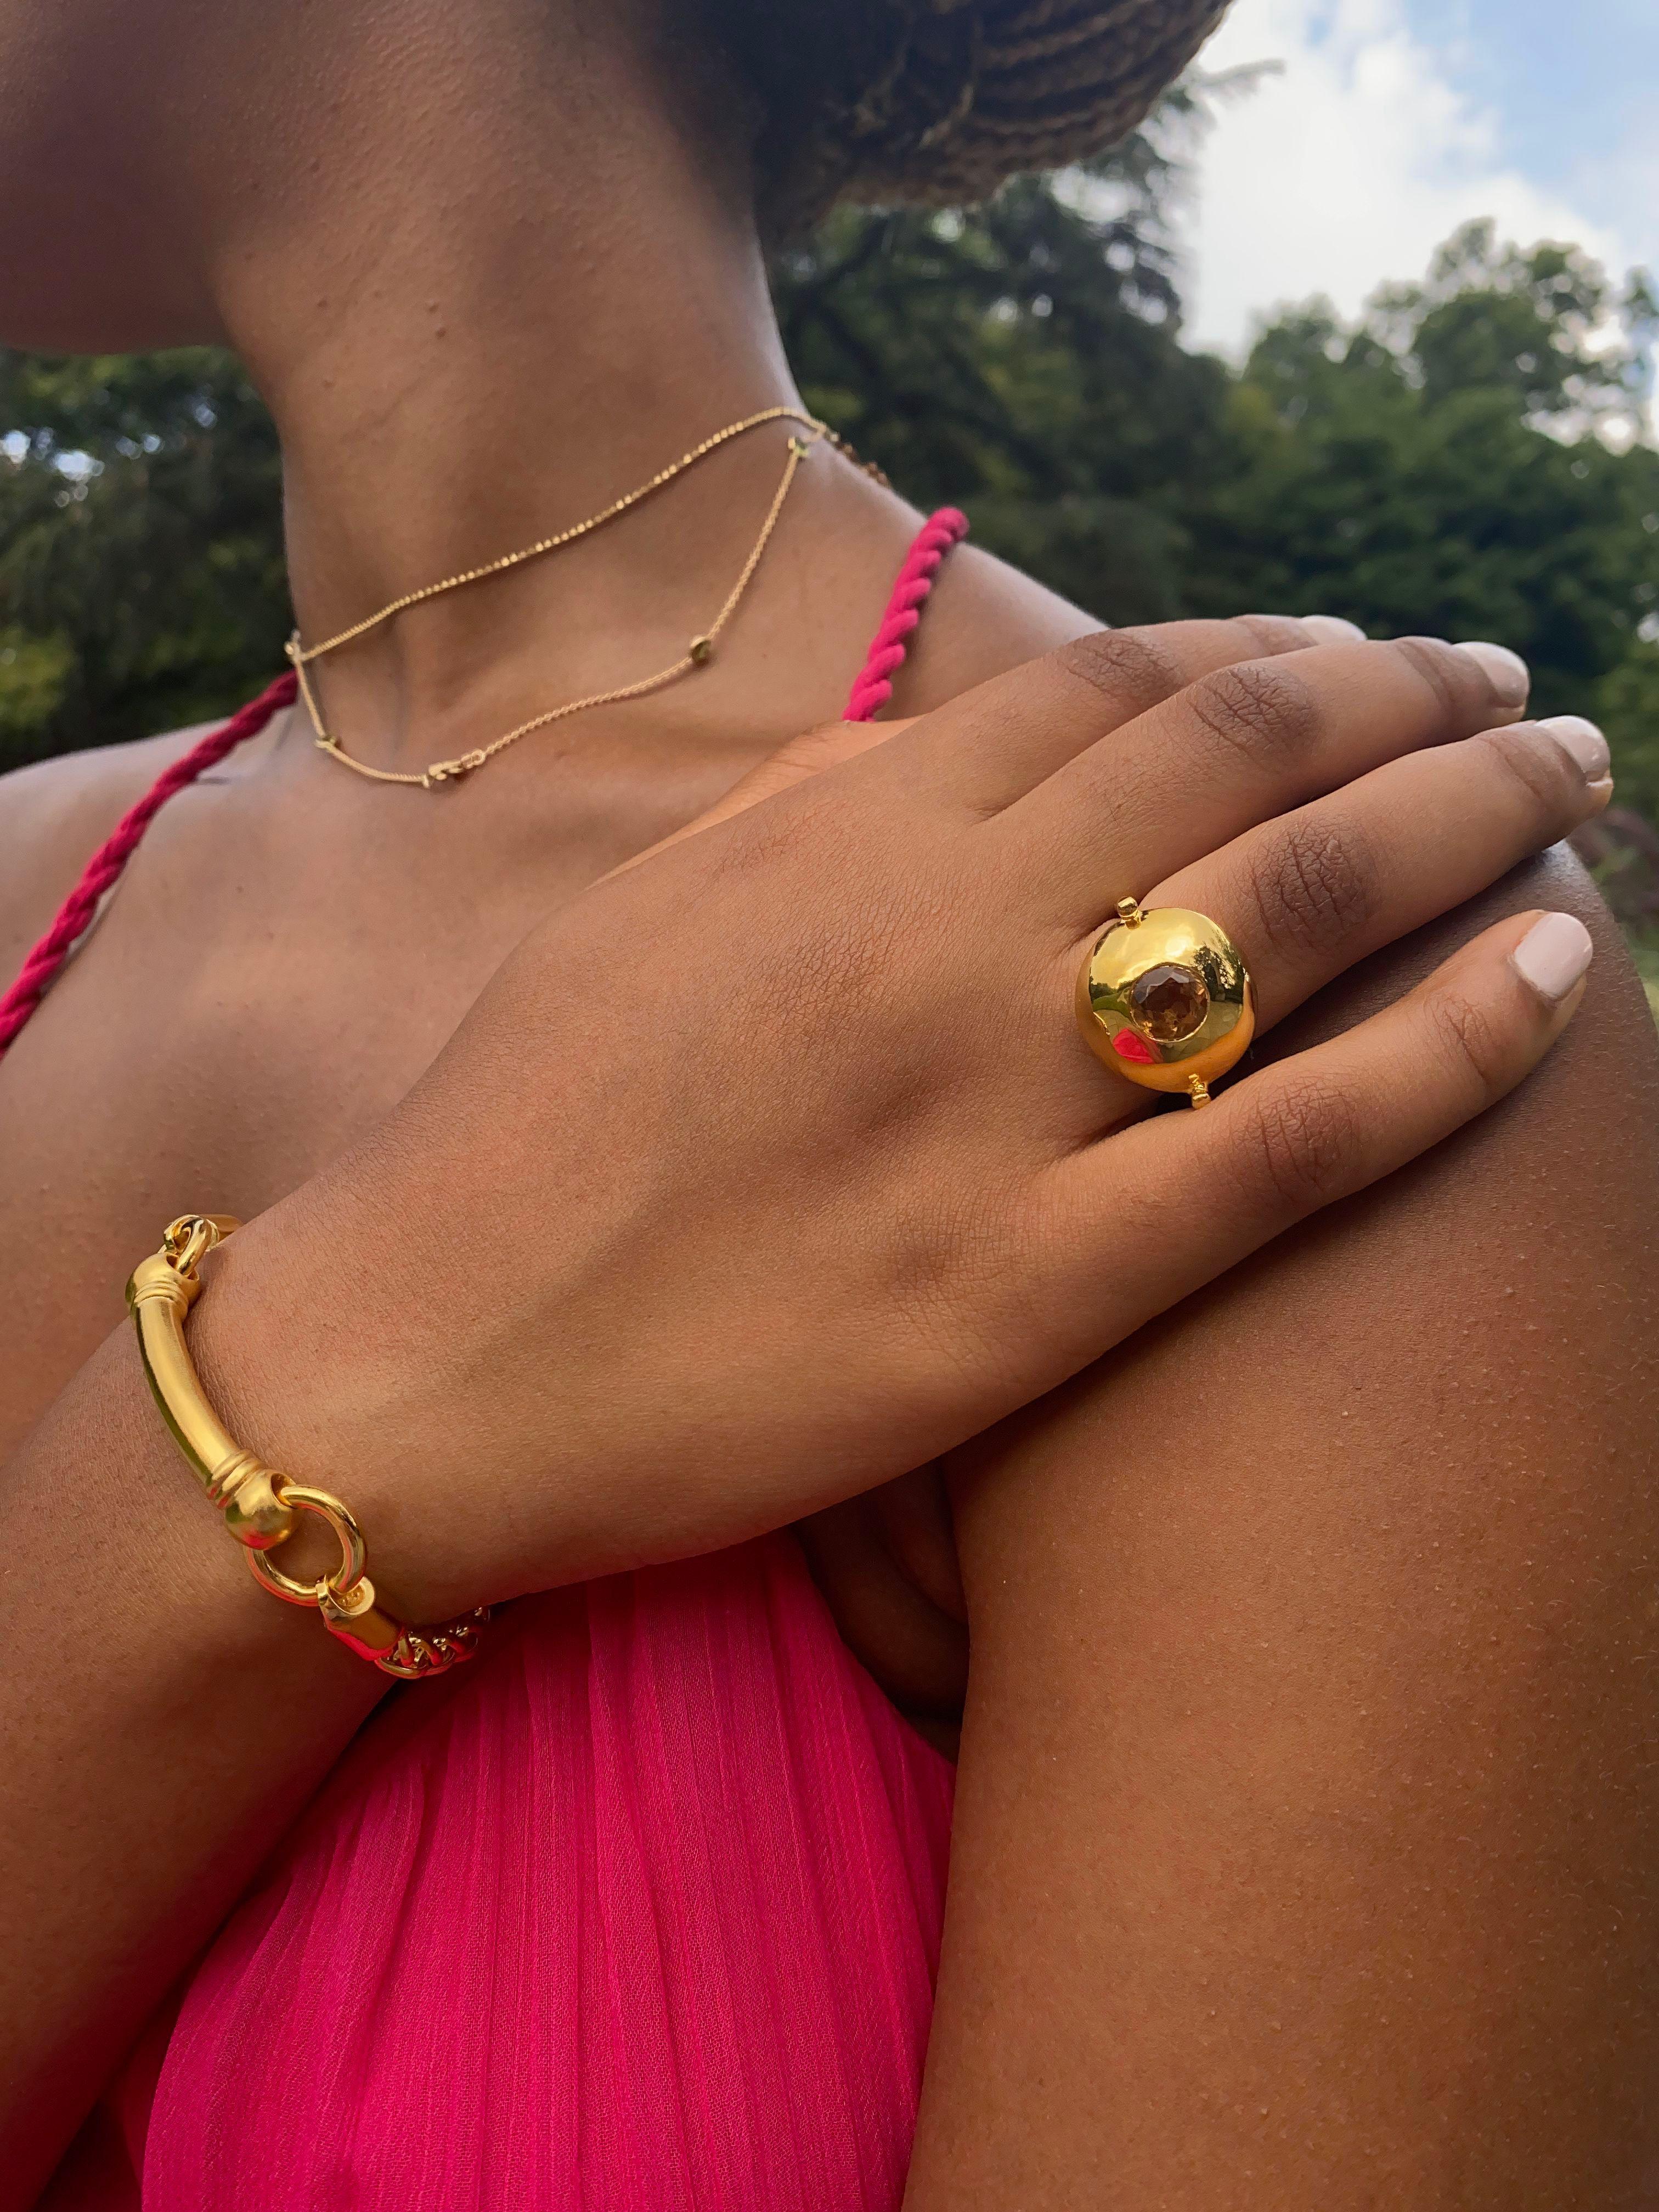 Brilliant Cut 22 Karat Gold Vermeil Orbit Ring with Yellow Citrine by Chee Lee New York For Sale